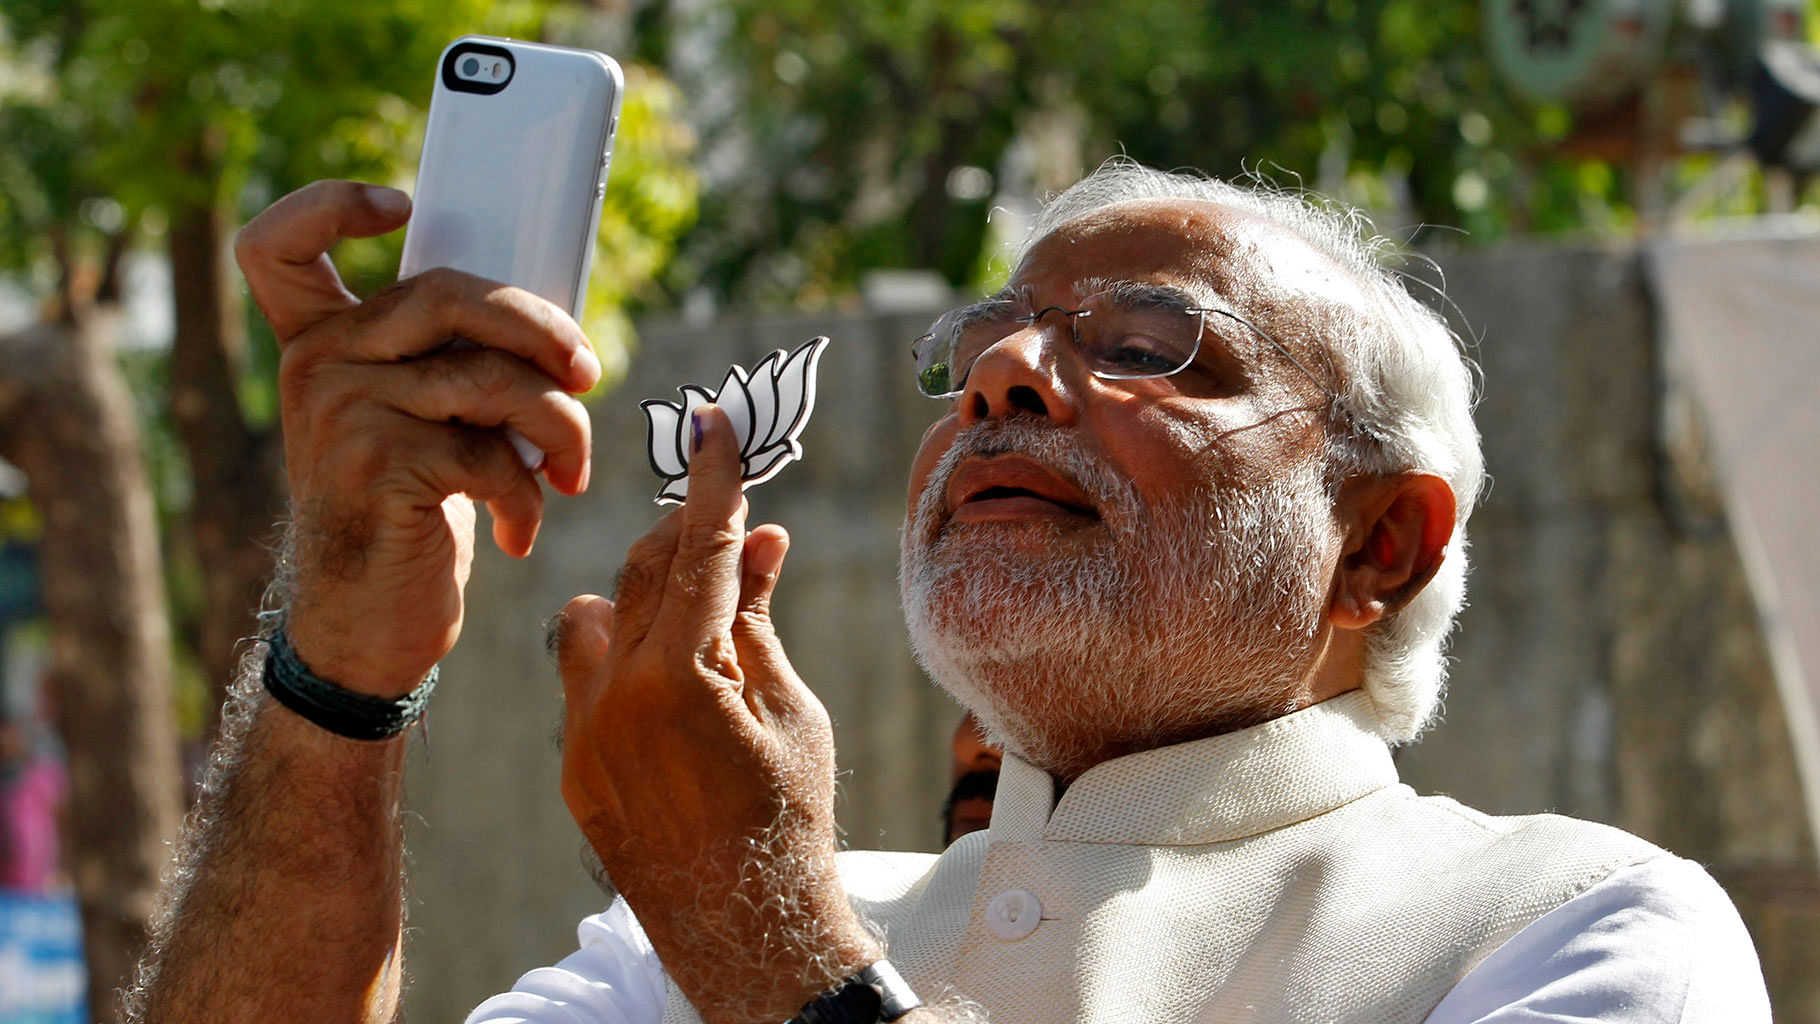 Narendra Modi taking a selfie after casting vote in the 2014 general election. (Photo: Reuters)